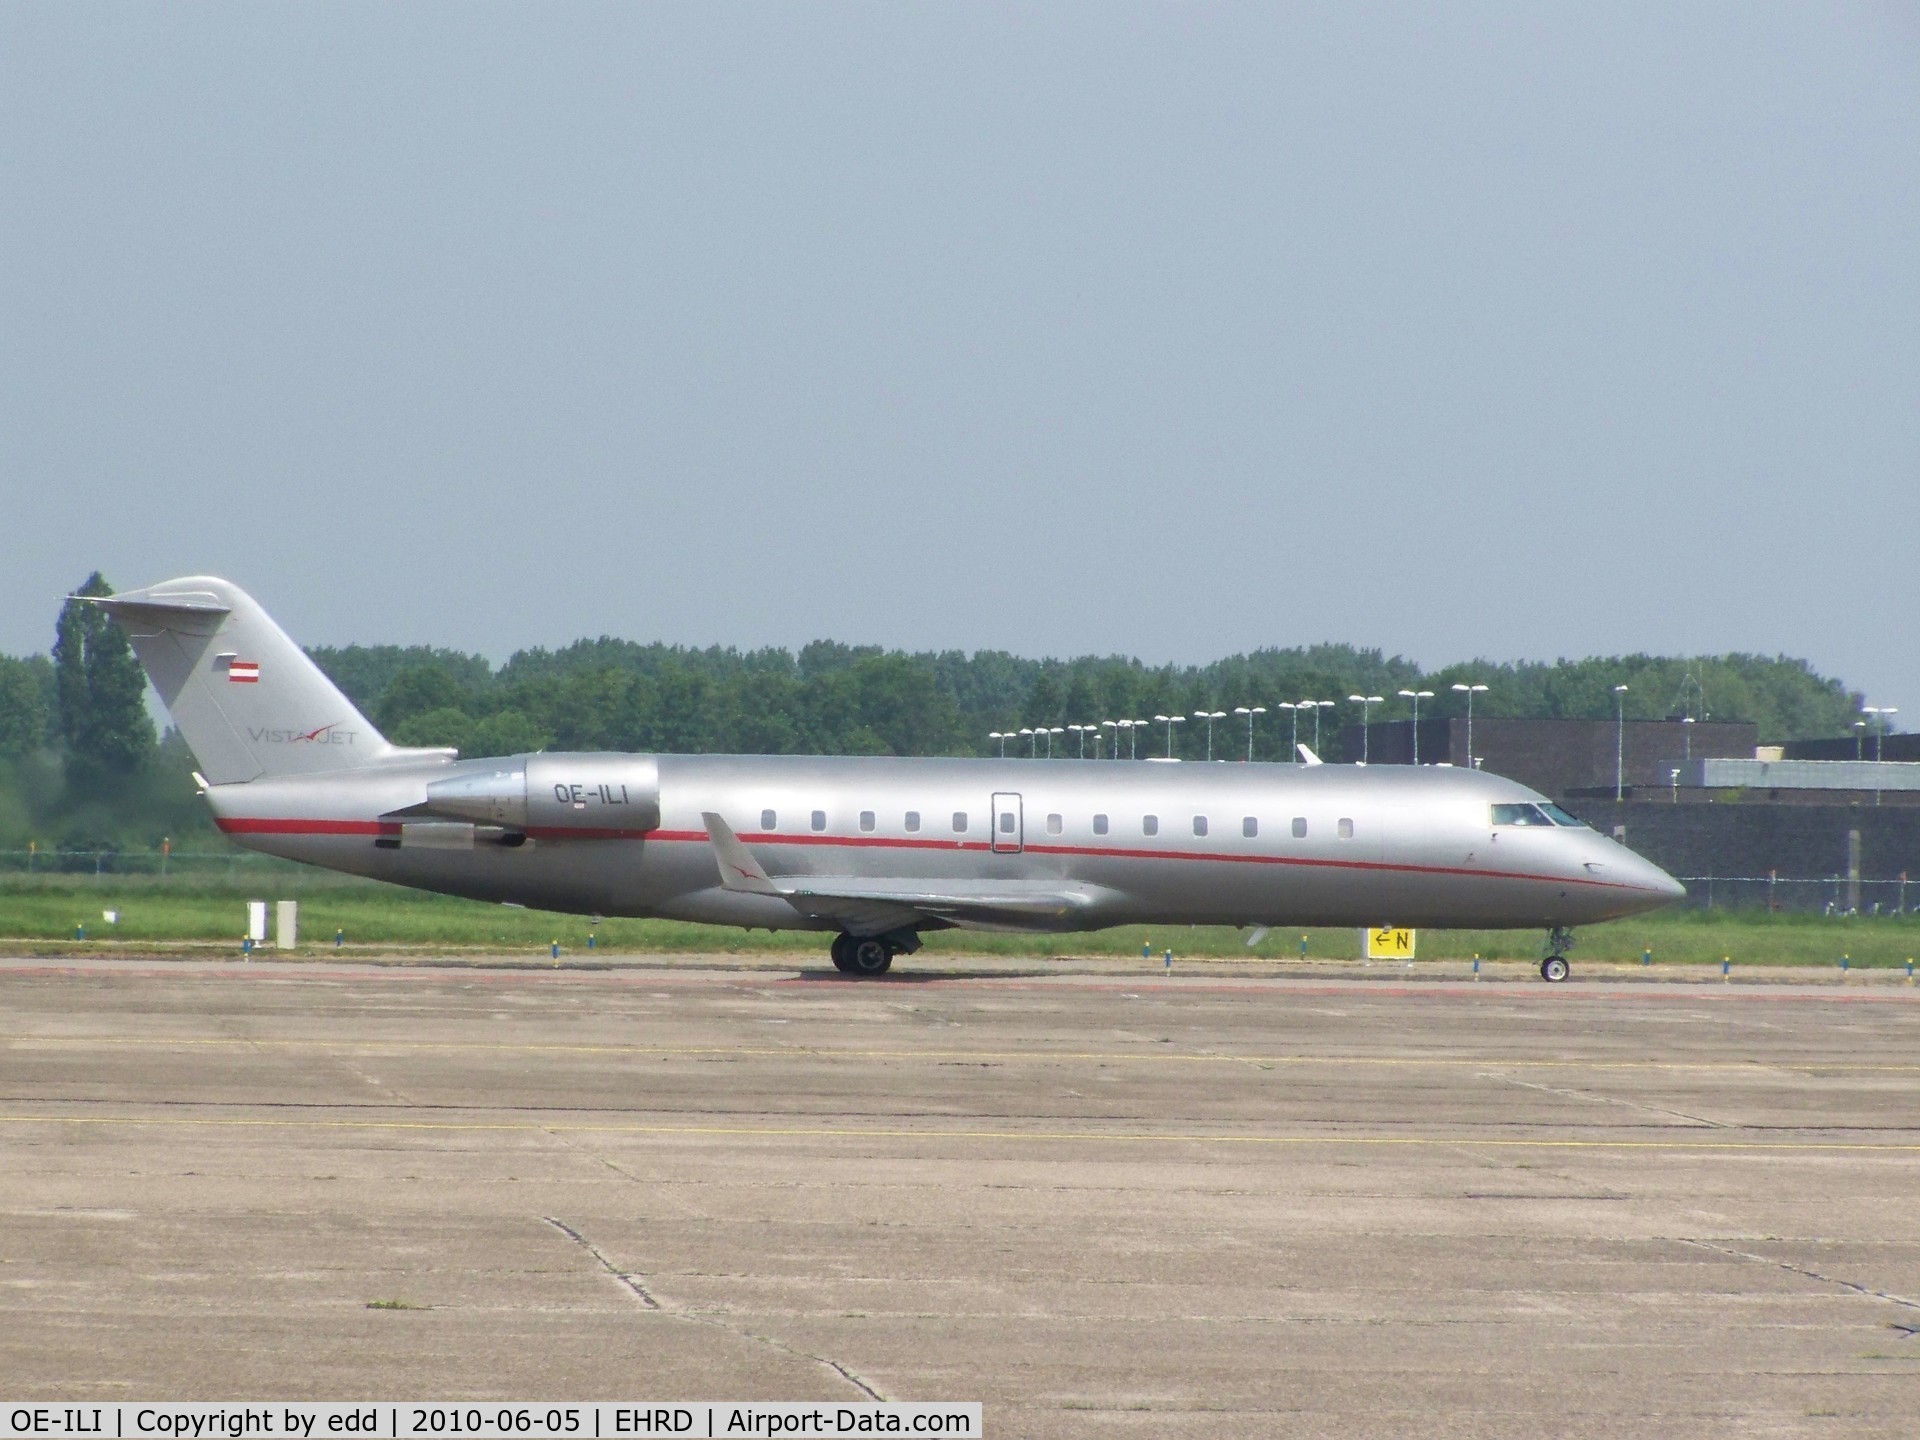 OE-ILI, 2005 Bombardier Challenger 850 (CL-600-2B19) C/N 8048, just landed with BON JOVI for a concert in the hague